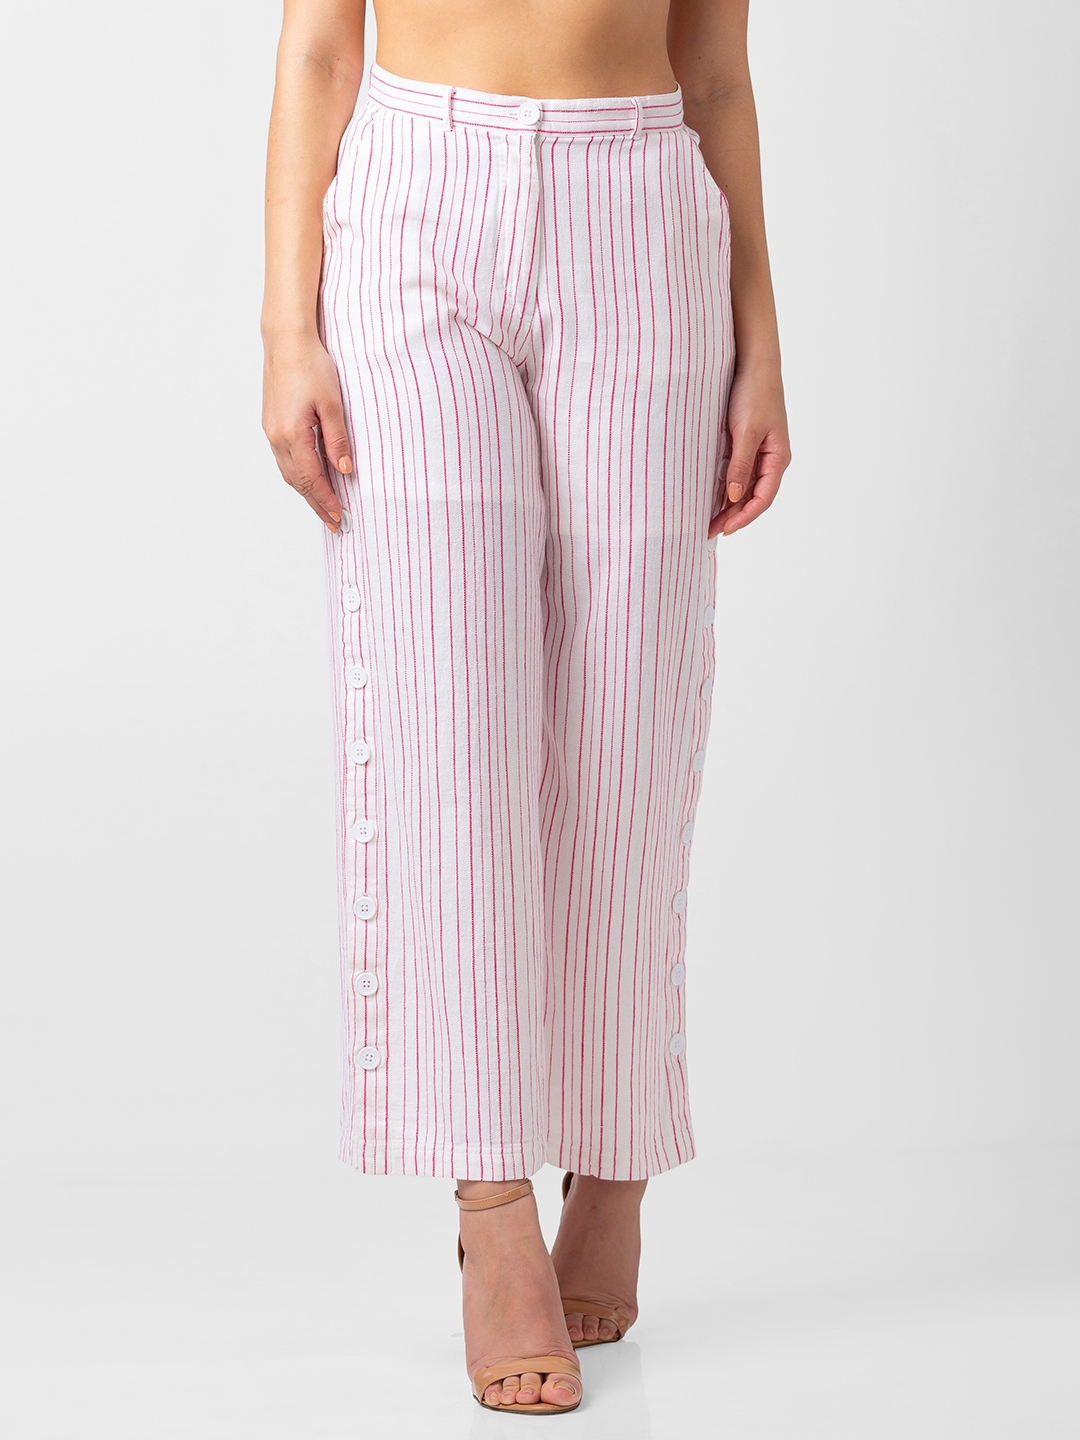 Archive At UO Black Pinstripe Flare Trousers  Urban Outfitters UK